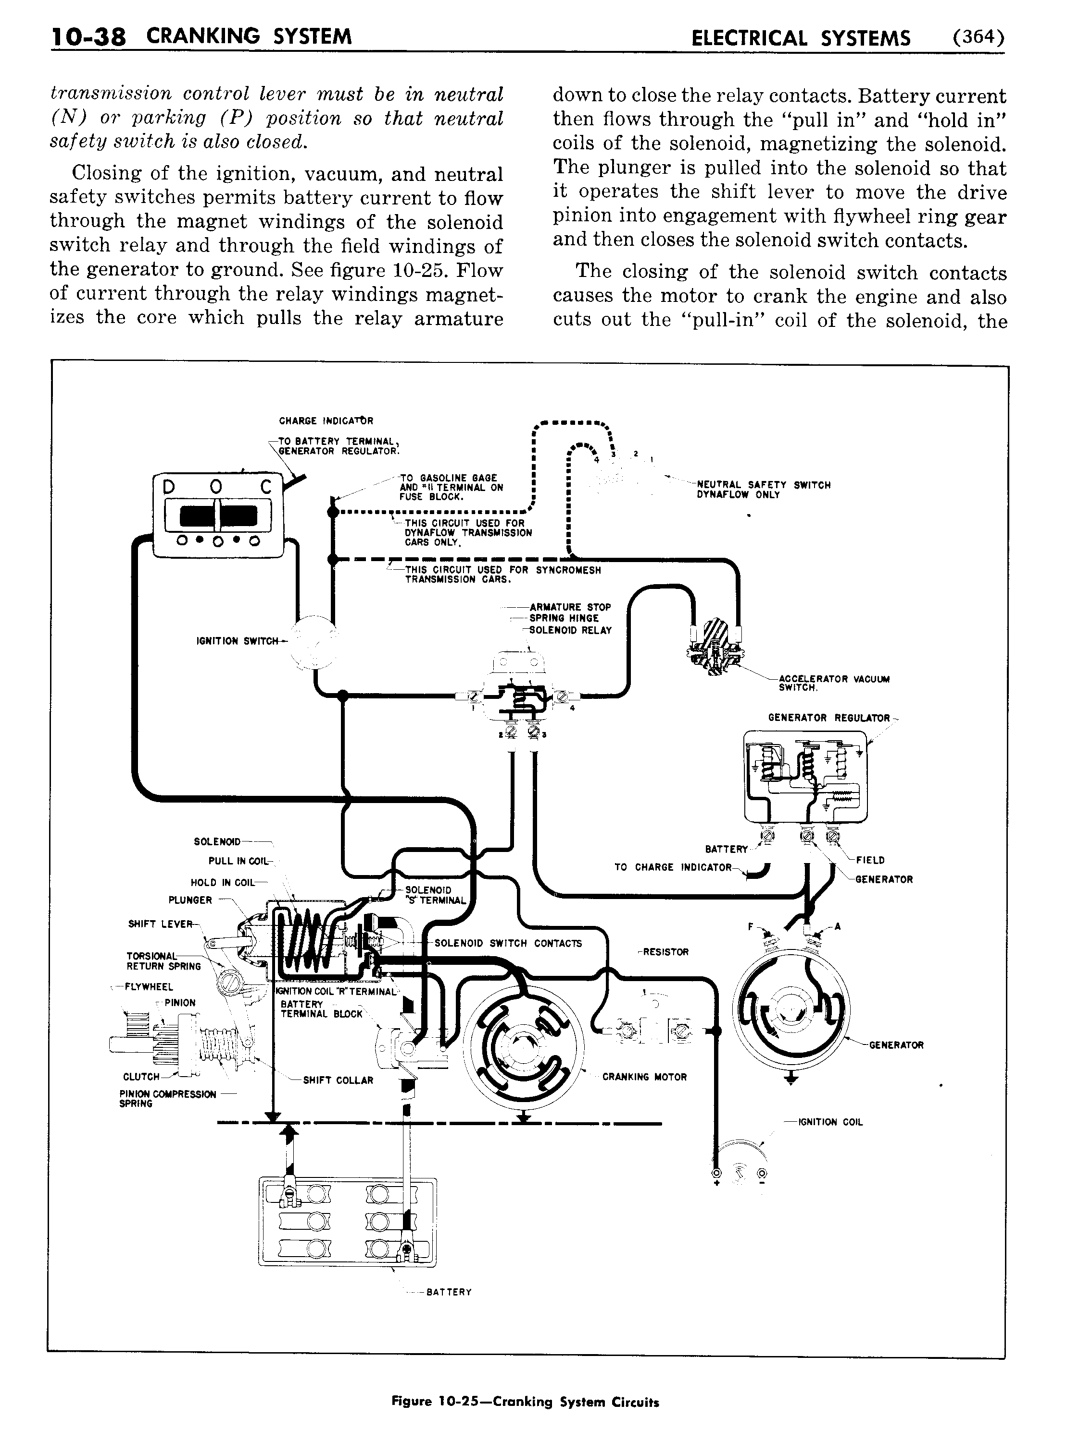 n_11 1956 Buick Shop Manual - Electrical Systems-038-038.jpg